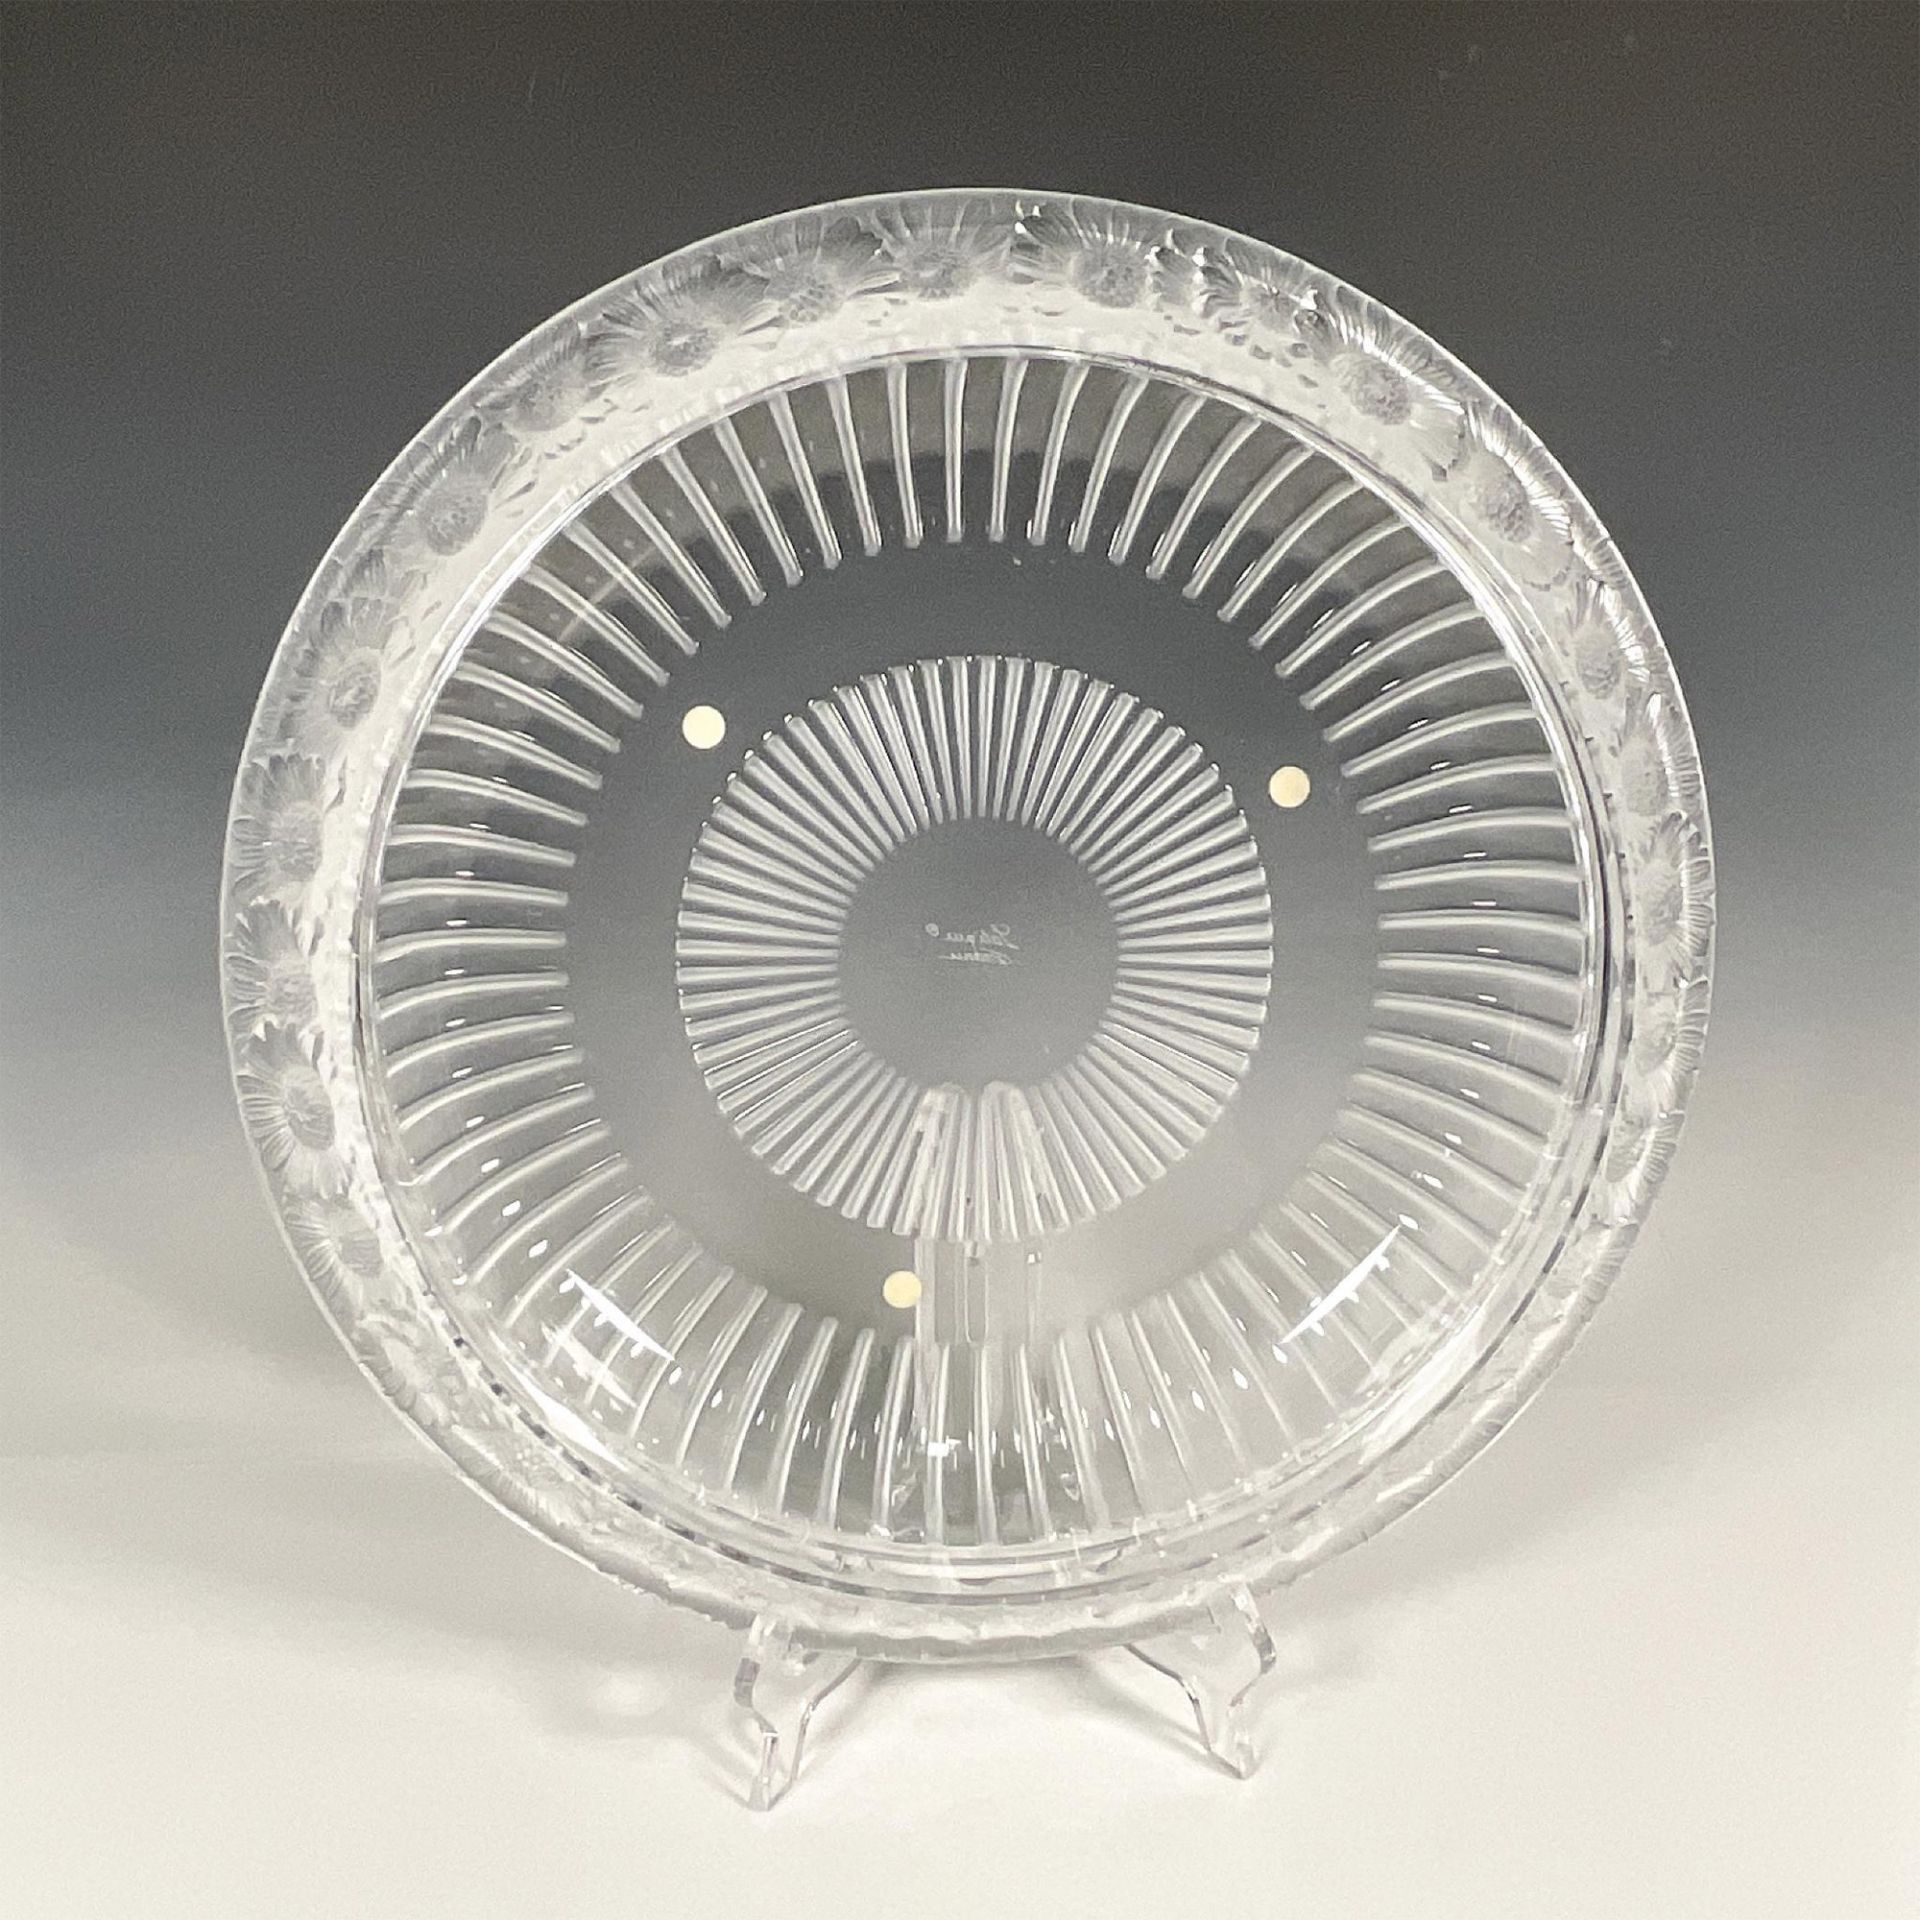 Lalique Crystal Decorative Bowl - Image 2 of 3